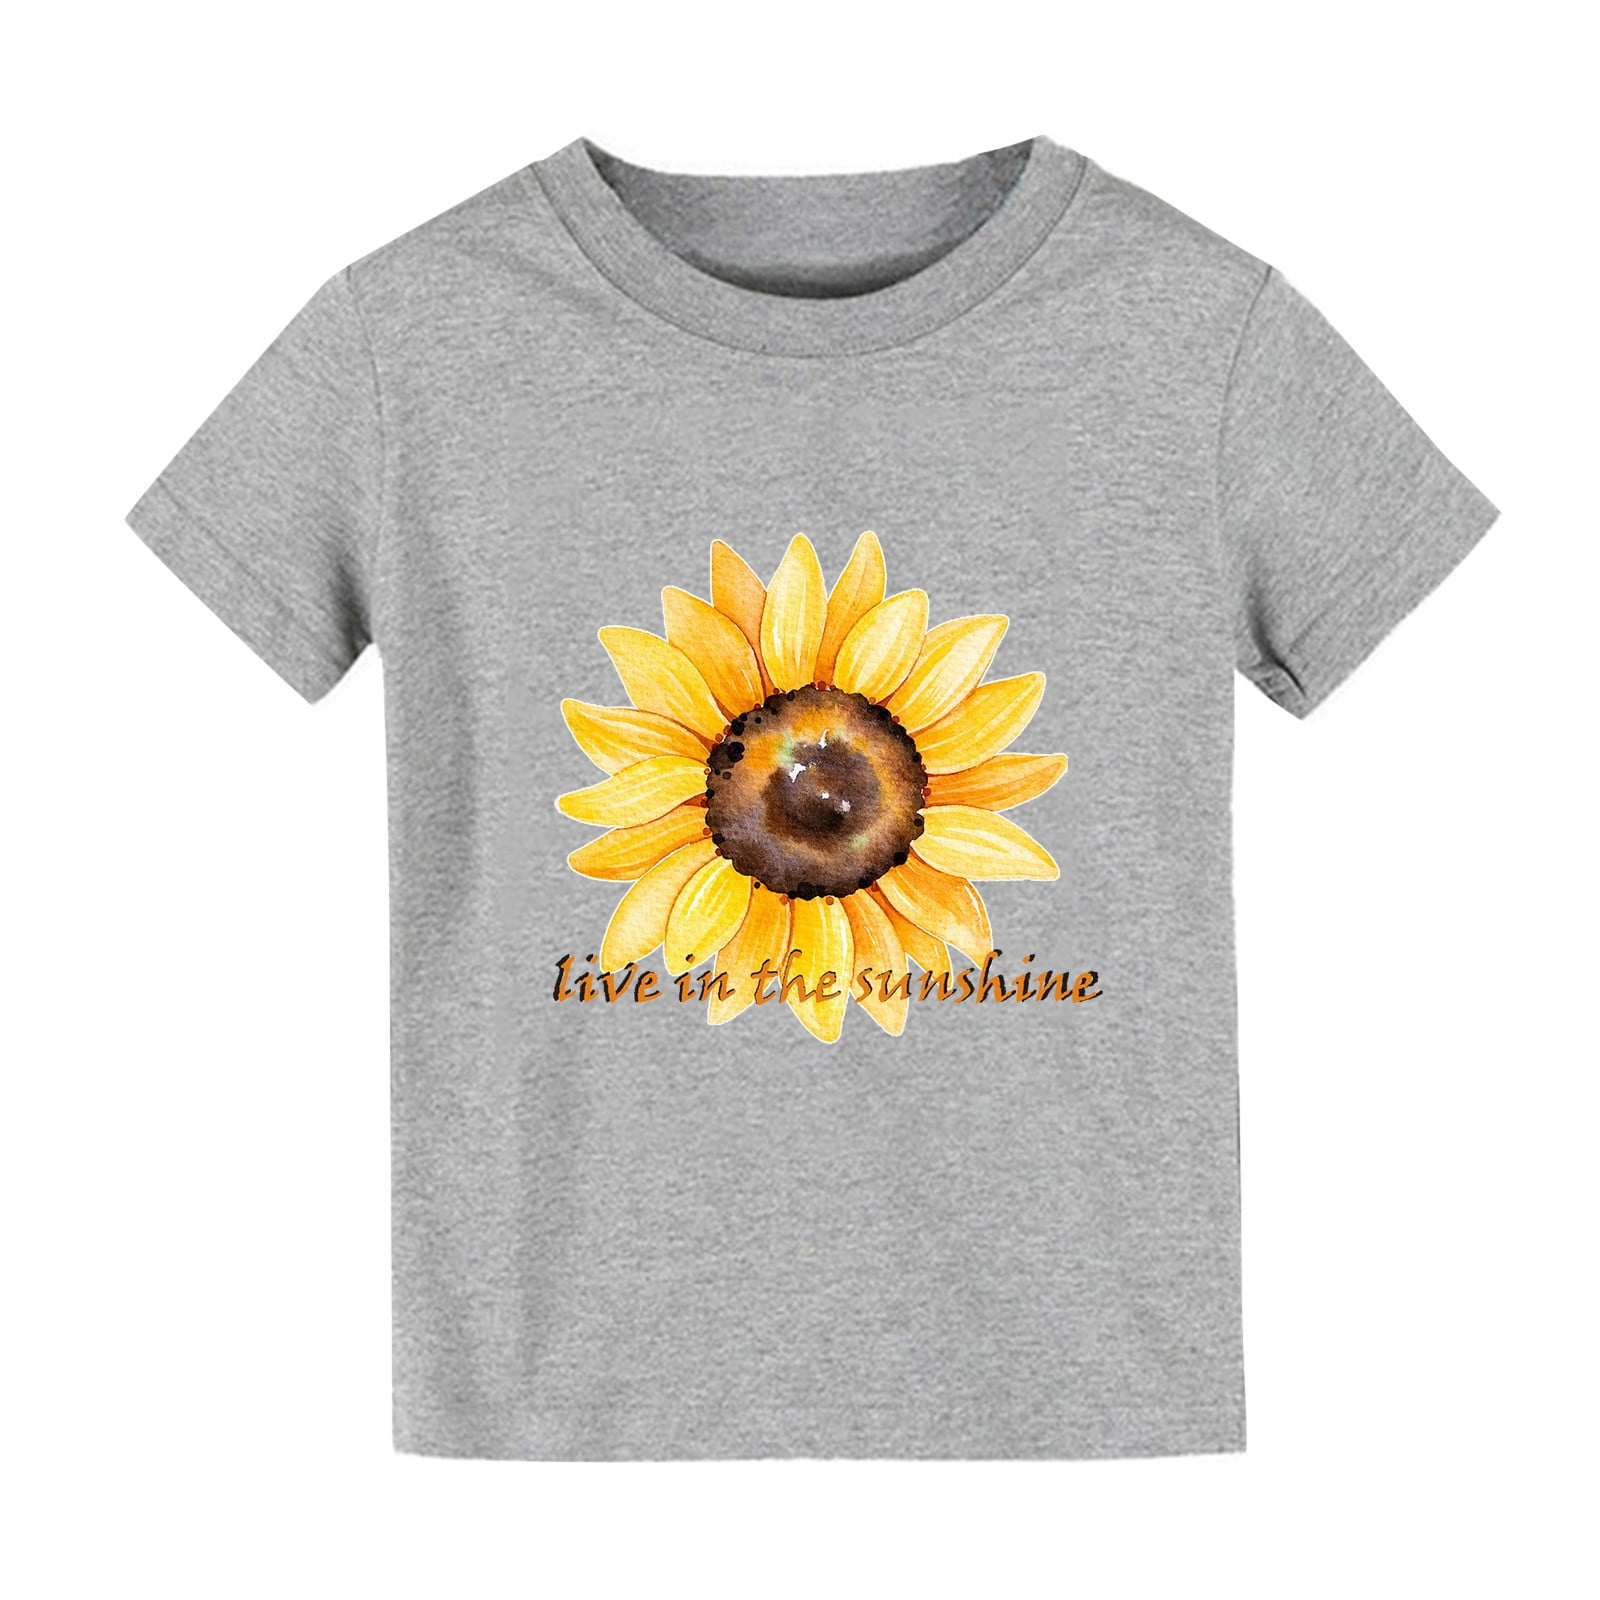 B91xZ Toddler Tees Girl Boys And Girls Tops Short Sleeved T Shirts  Sunflower Cartoon Print LIVE IN THE SUNSHINE for Boys And,Sizes 12-18  Months 